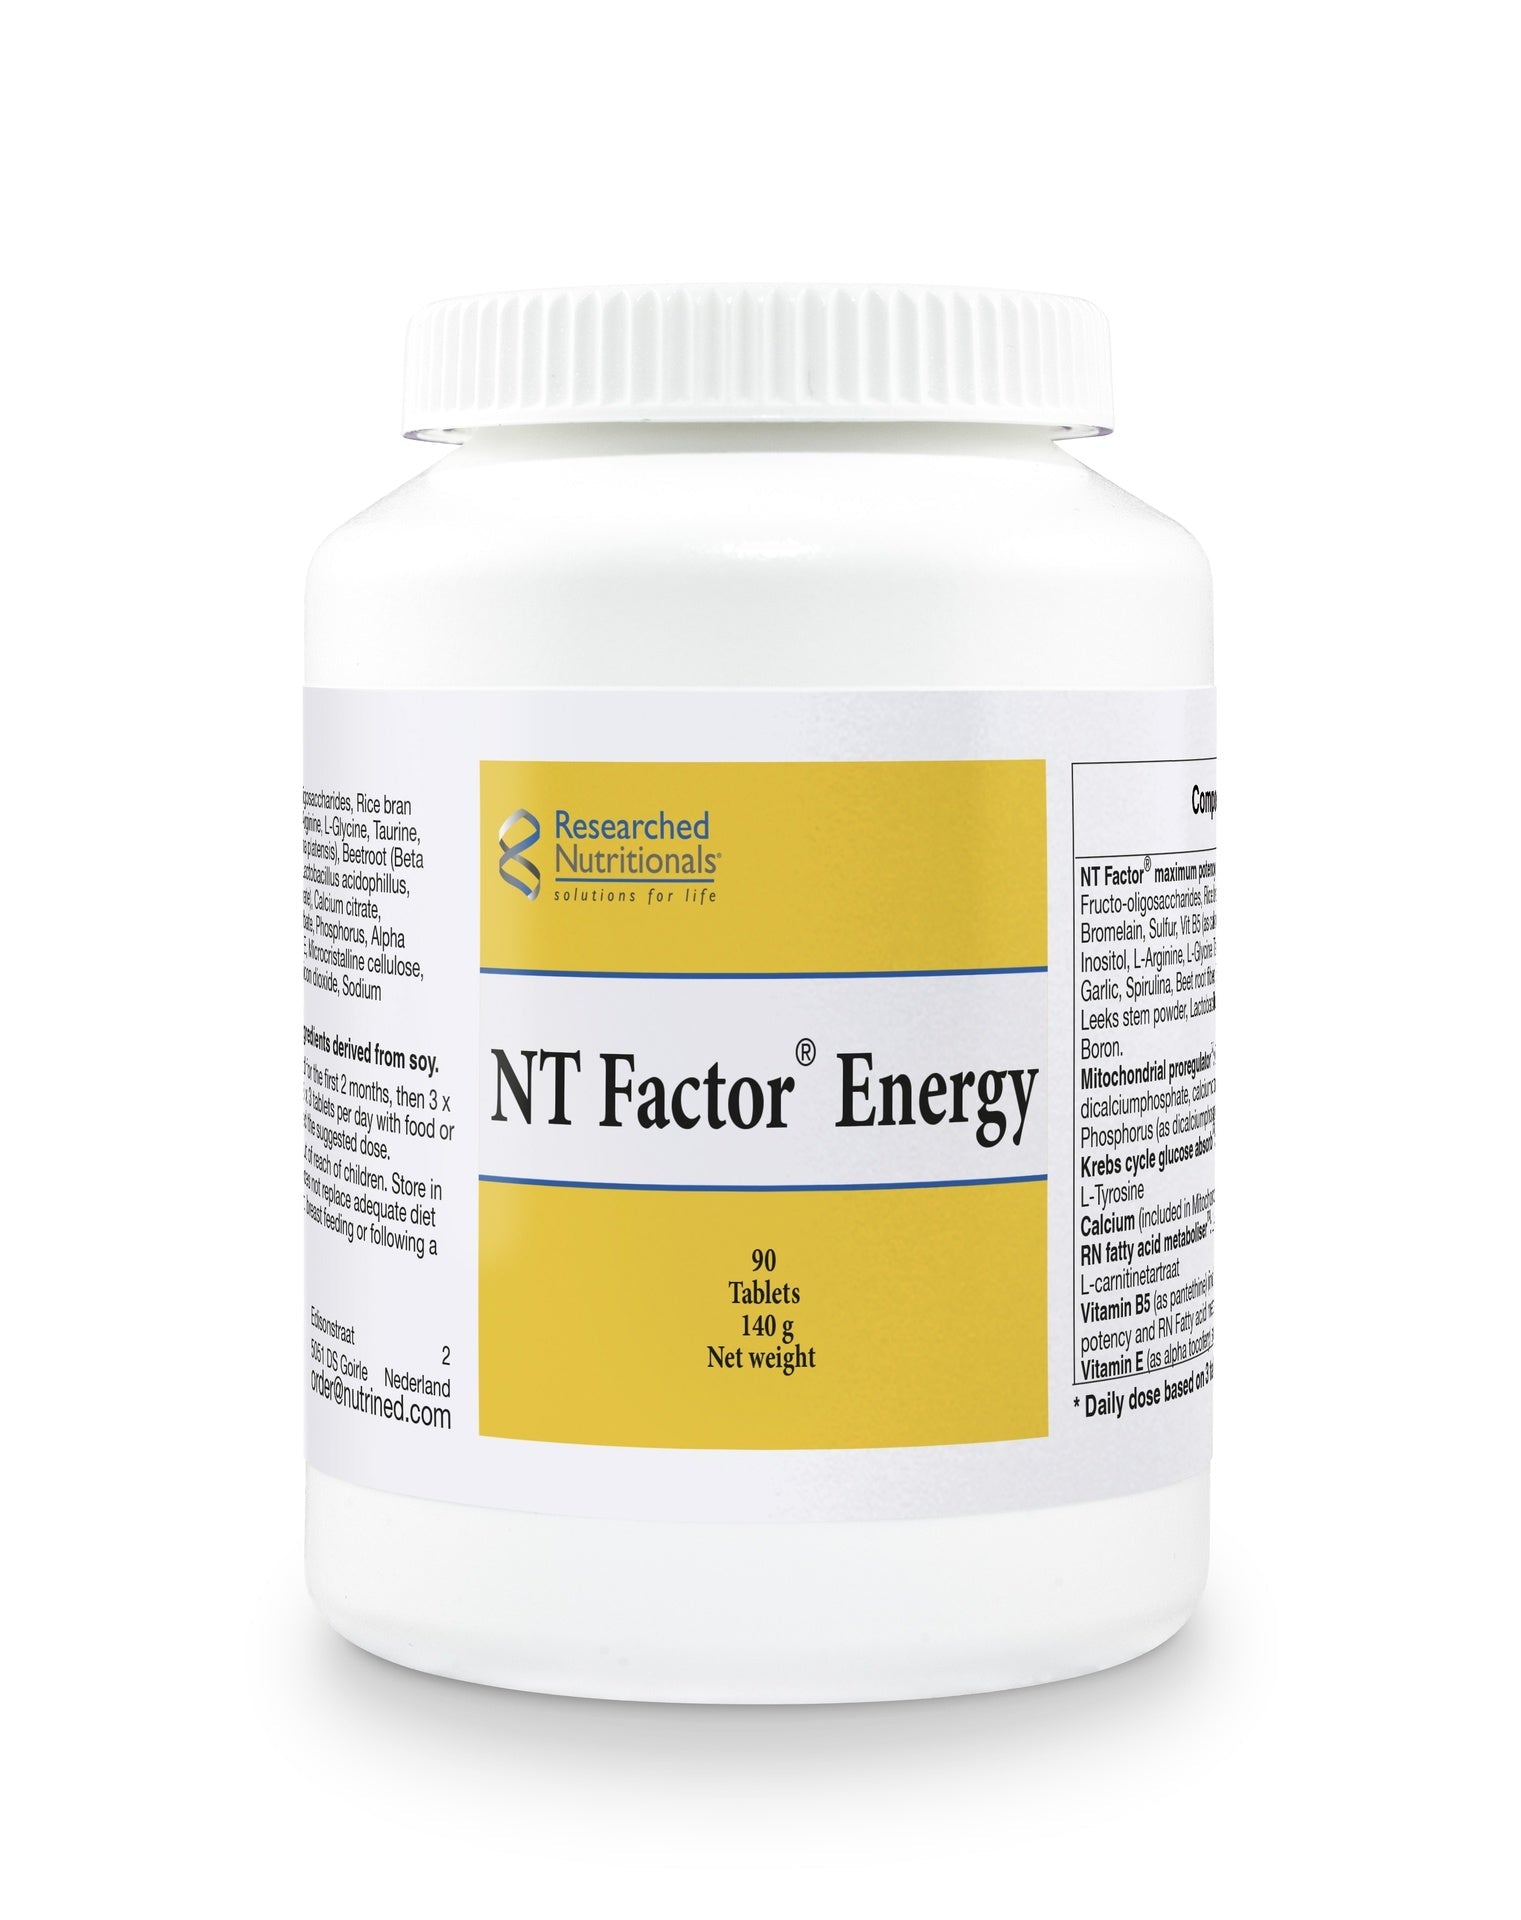 NT Factor Energy Mitochondrial Formula - 90 Tablets | Researched Nutritionals